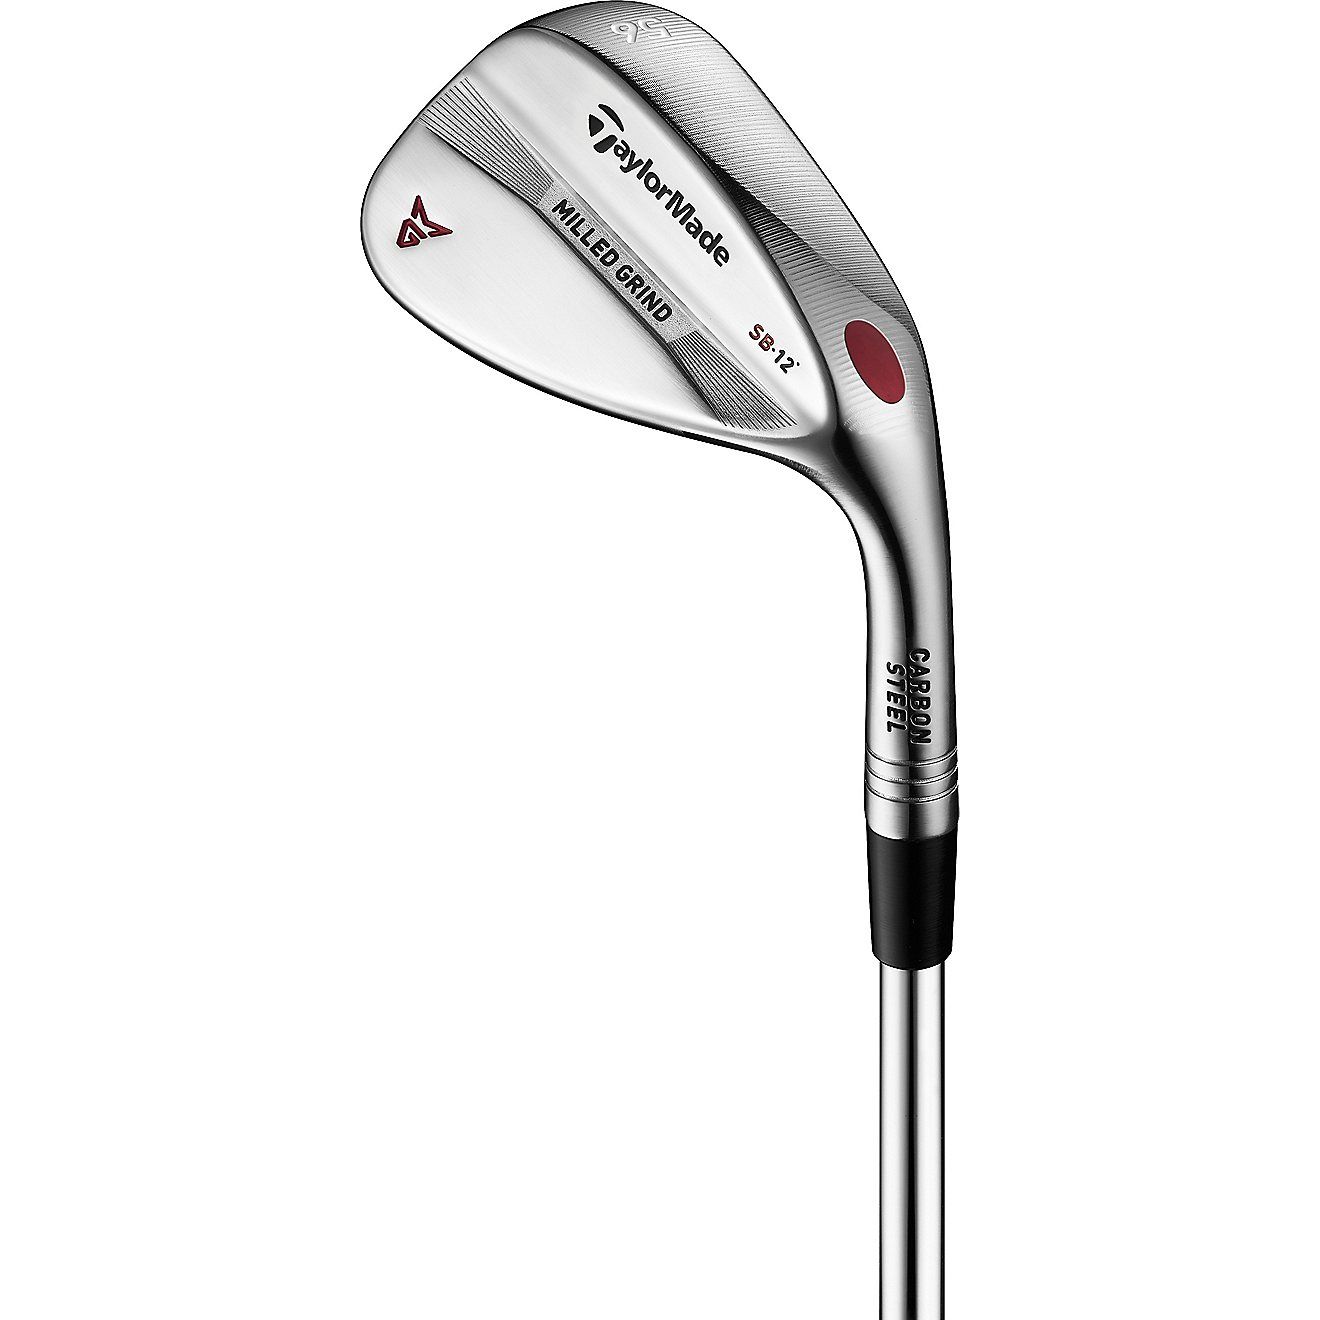 TaylorMade MG1 Wedge | Academy | Academy Sports + Outdoors